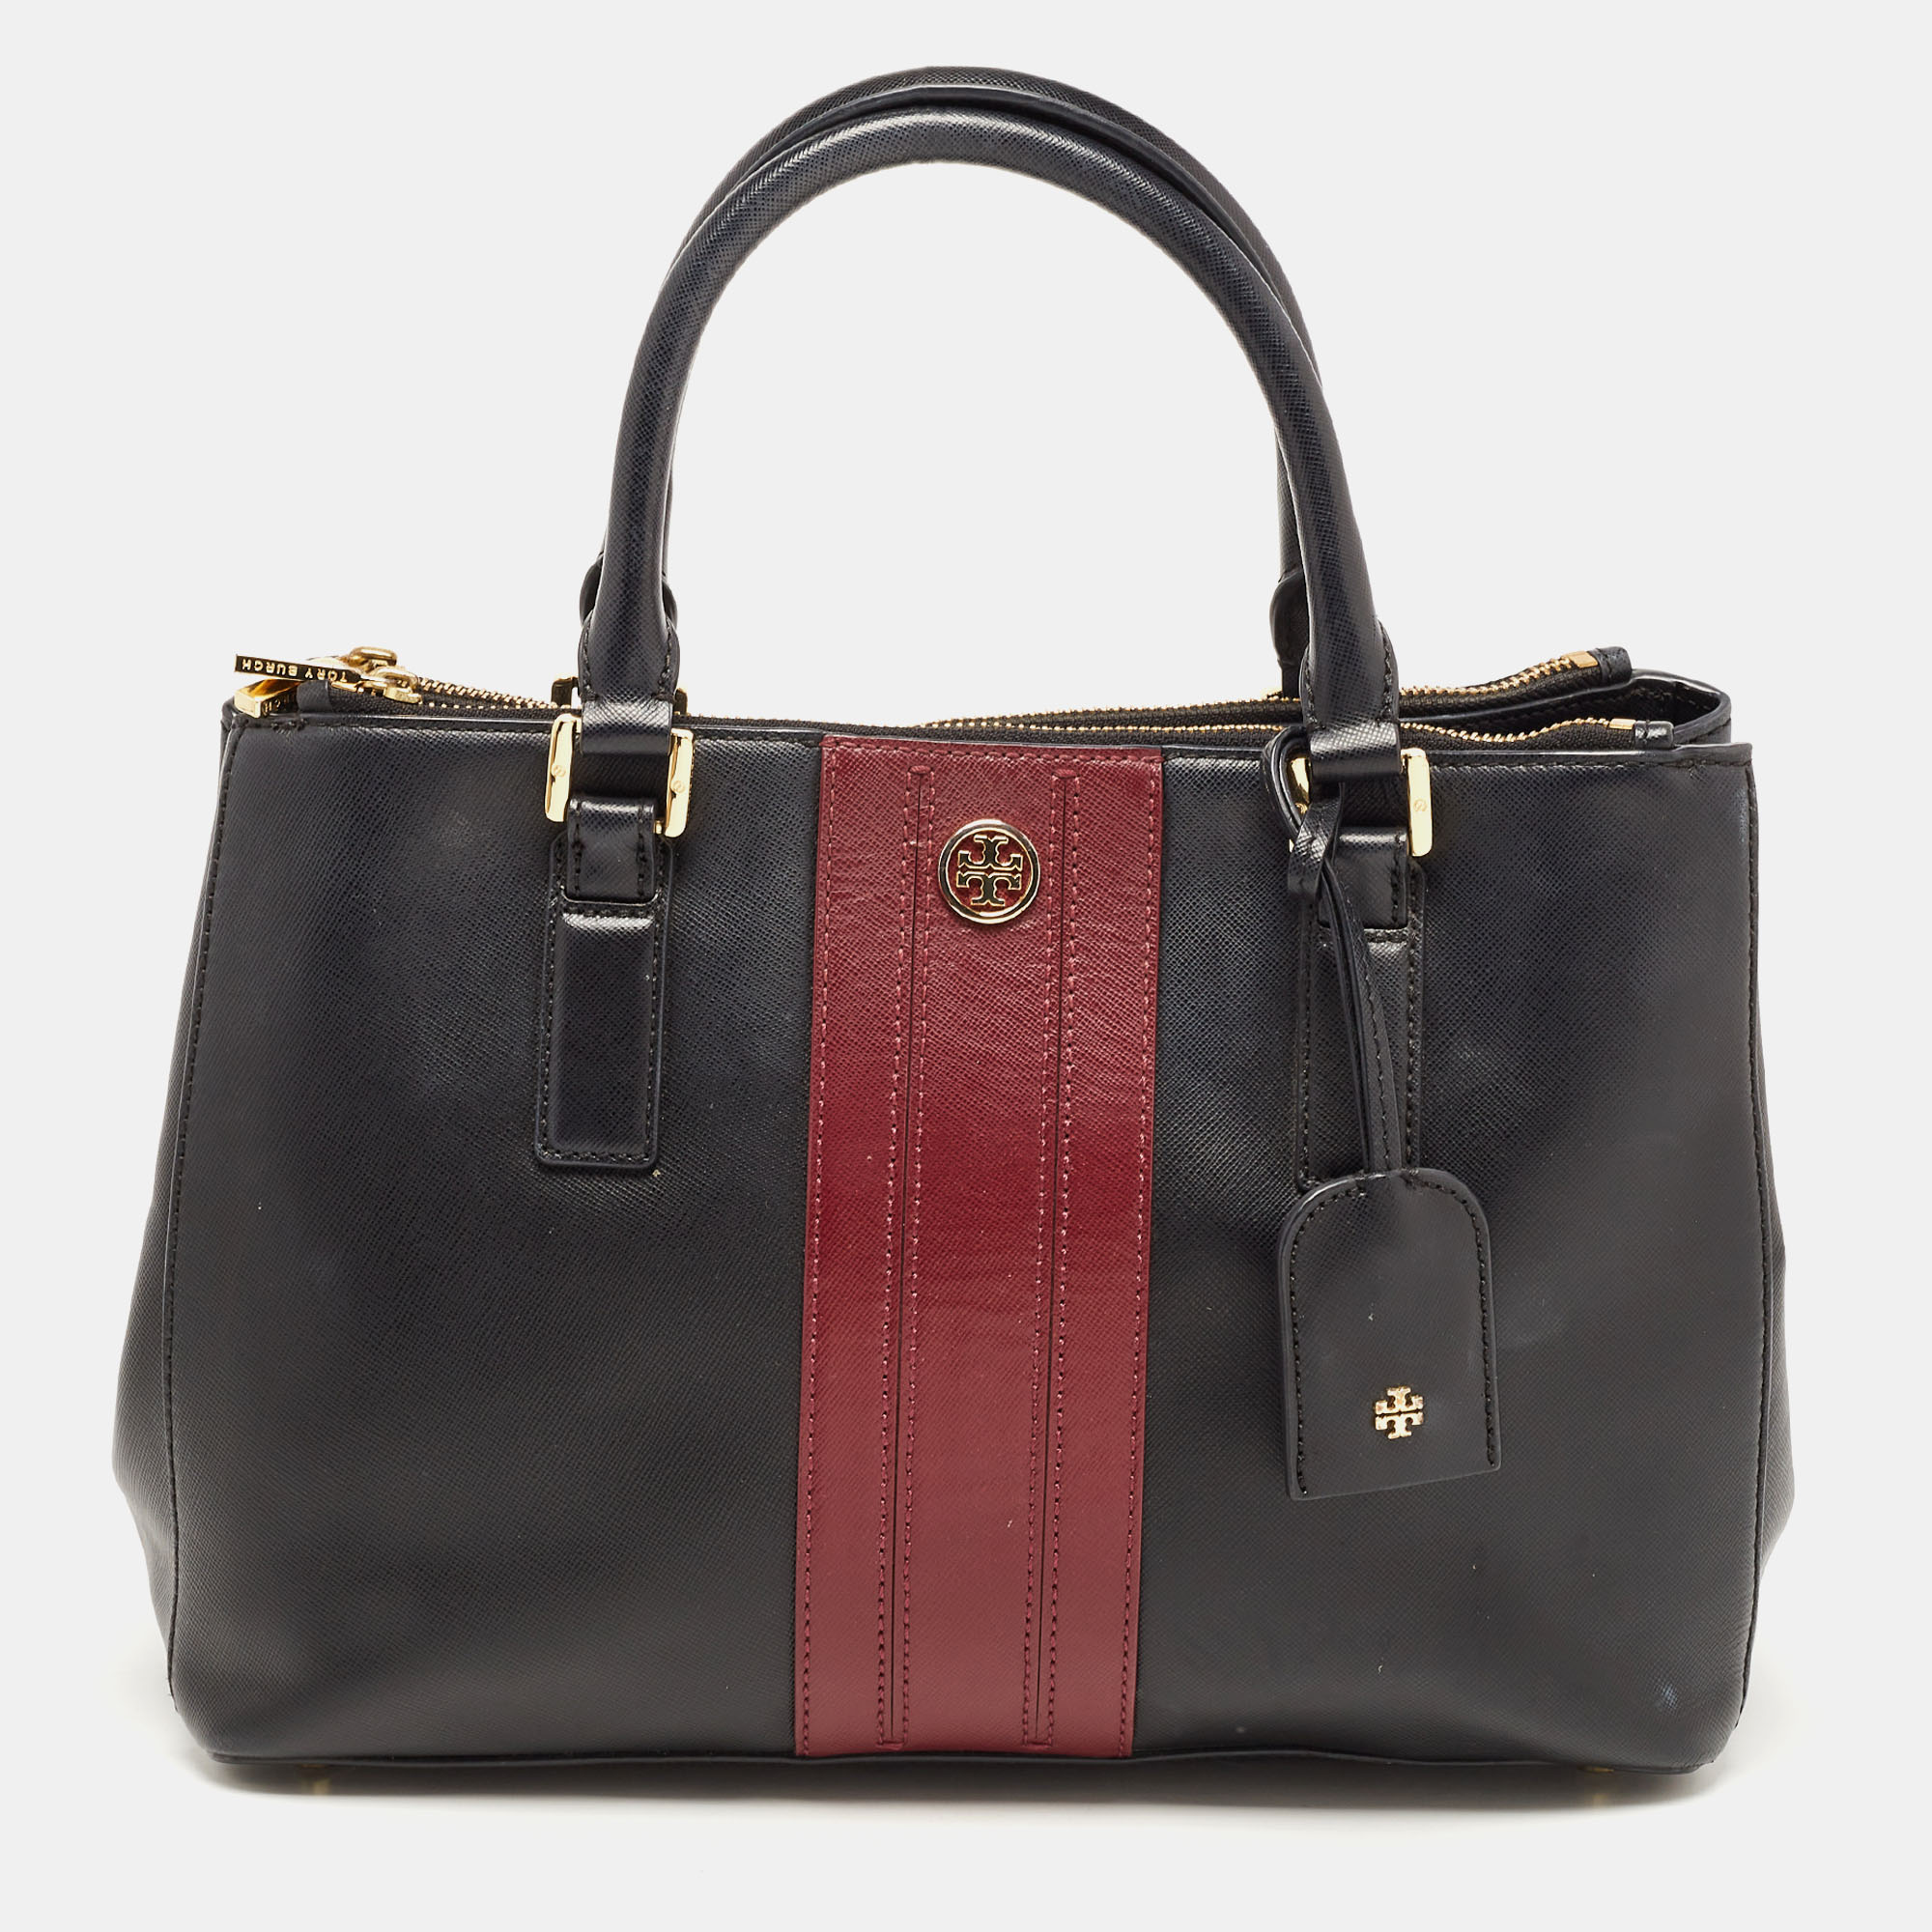 Tory Burch Black/Burgundy Saffiano Leather Robinson Double Zip Tote